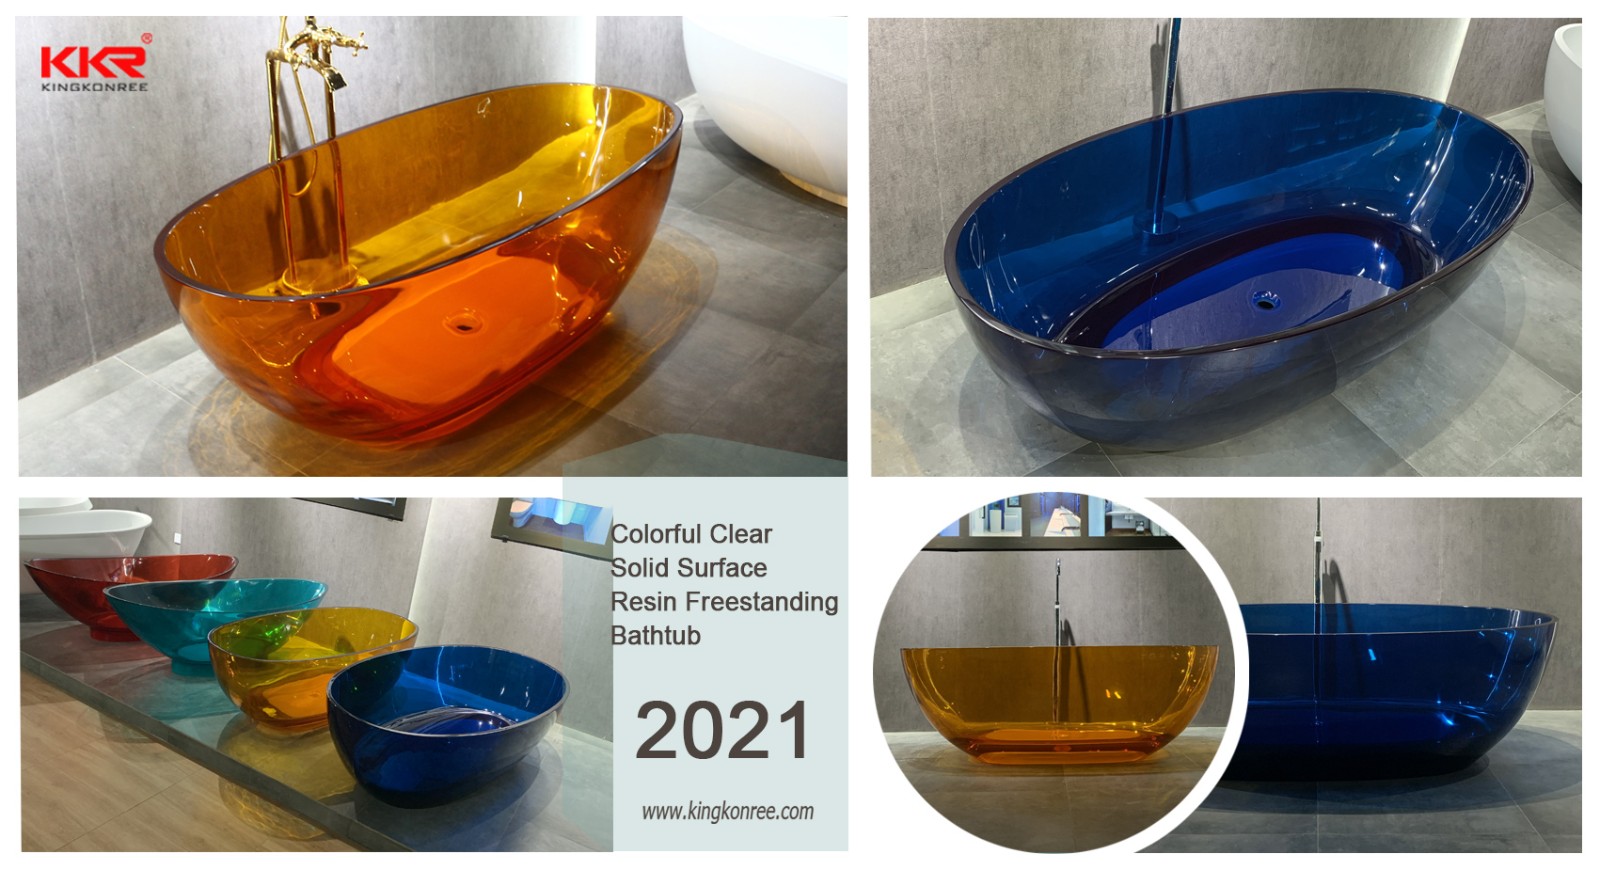 Many colors of composite bathtubs to select